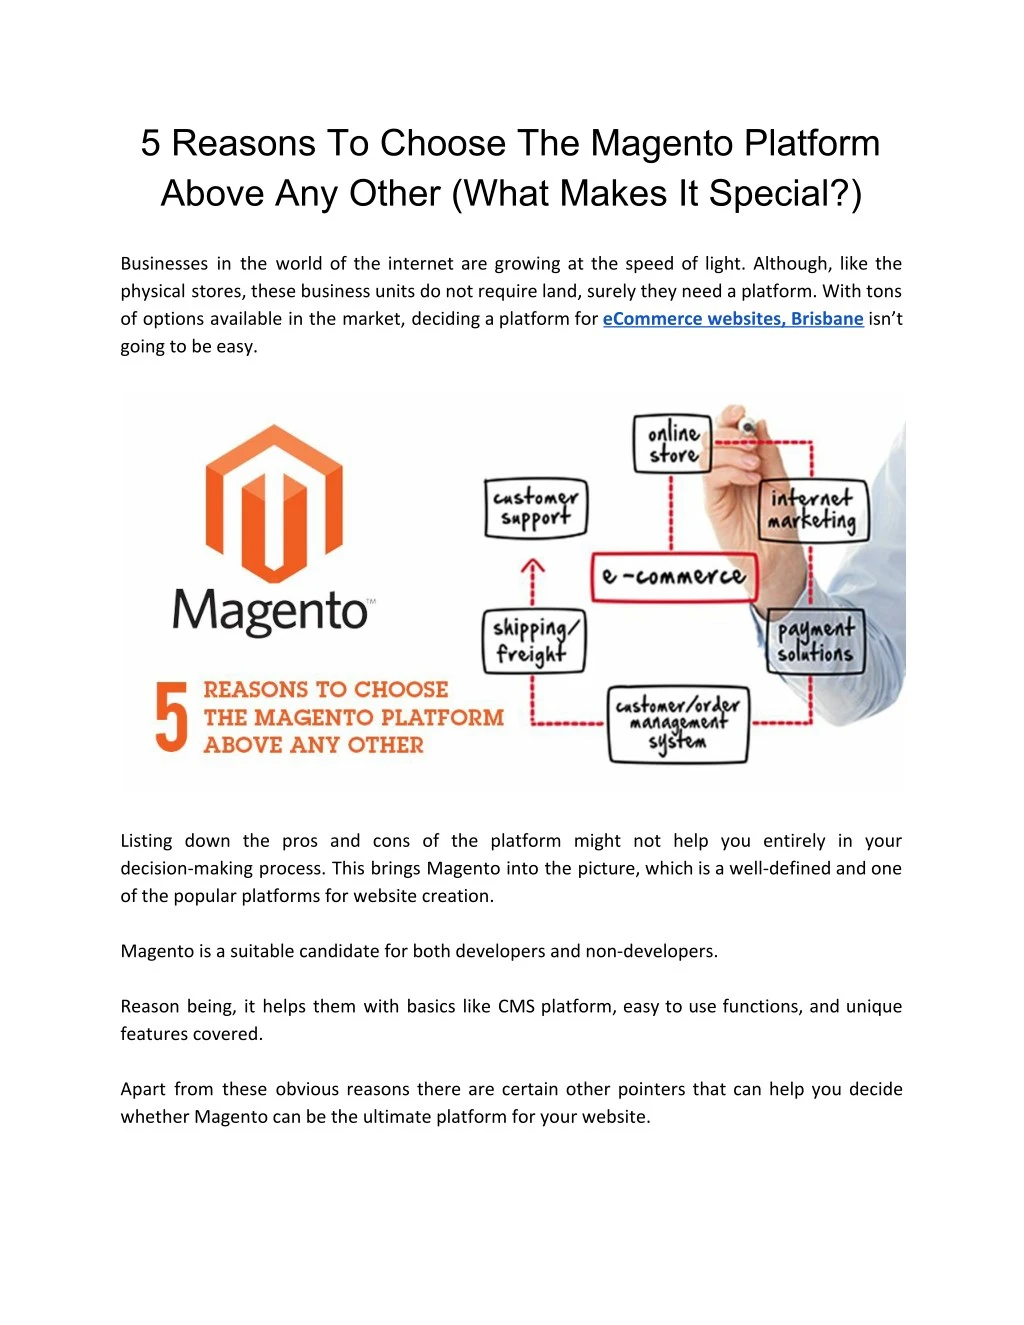 5 reasons to choose the magento platform above